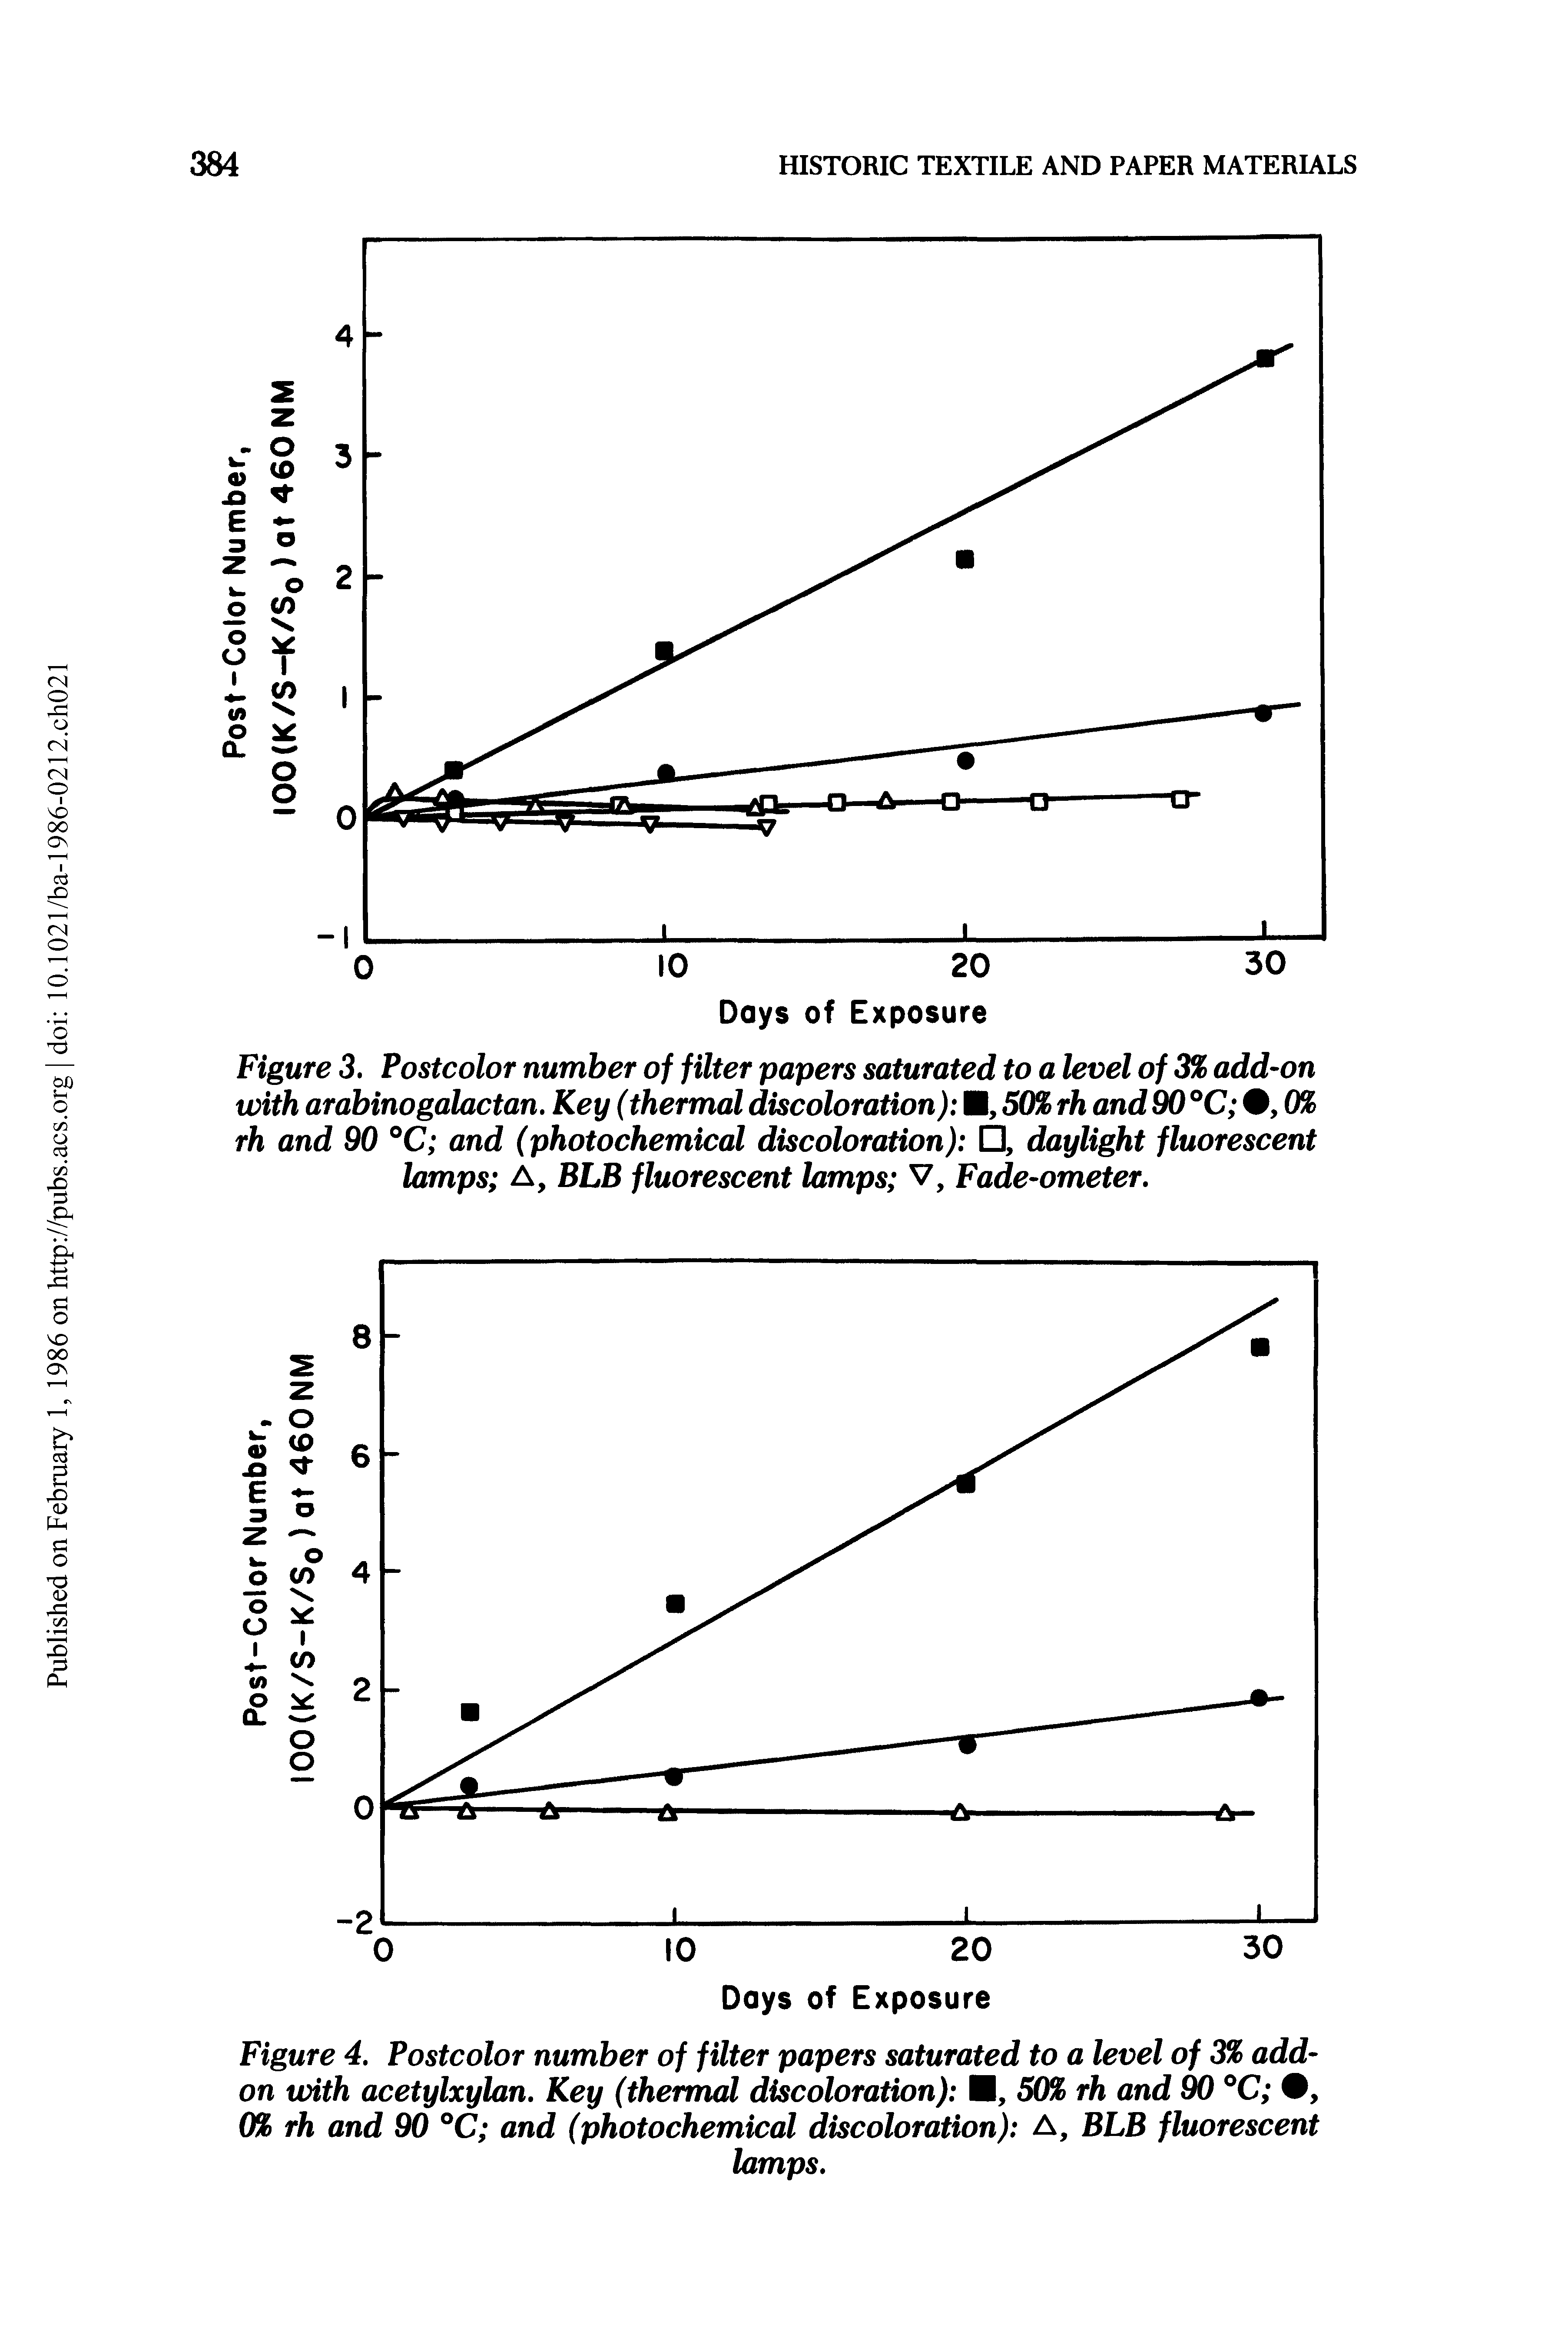 Figure 3. Postcolor number of filter papers saturated to a level of 3% add-on with arabinogalactan. Key (thermal discoloration) , 50% rh and 90 °C , 0% rh and 90 °C and (photochemical discoloration) , daylight fluorescent lamps A, BLB fluorescent lamps V, Fade-ometer.